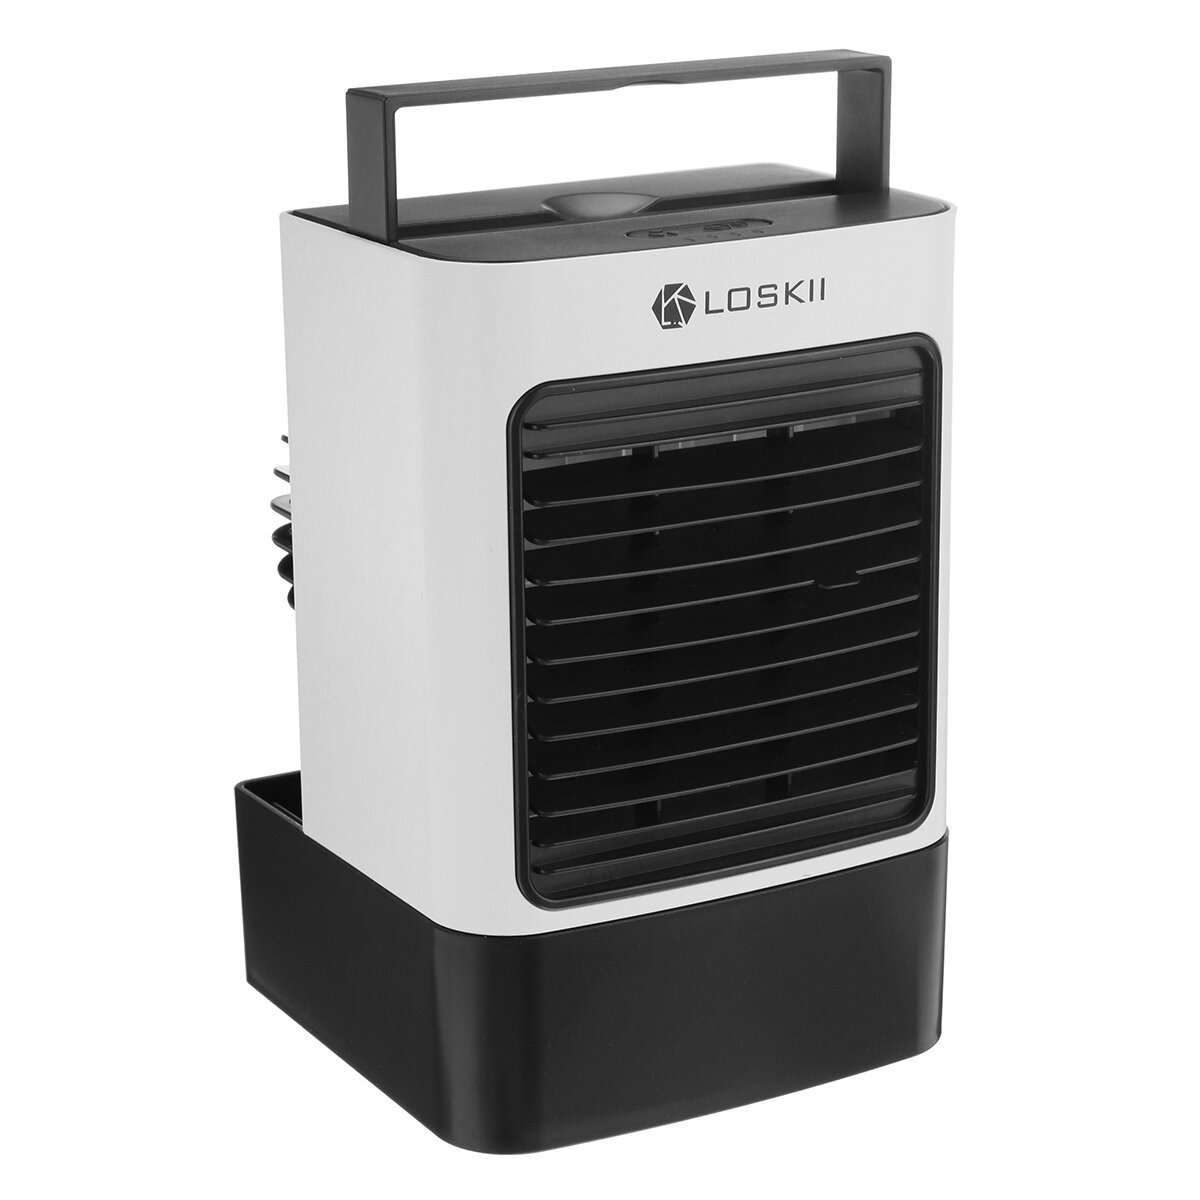 Loskii F830 Negative Ion Air Conditioner Air Cooler Desktop Electric Fan Two Blowing Modes Three Gear Wind Speeds with N